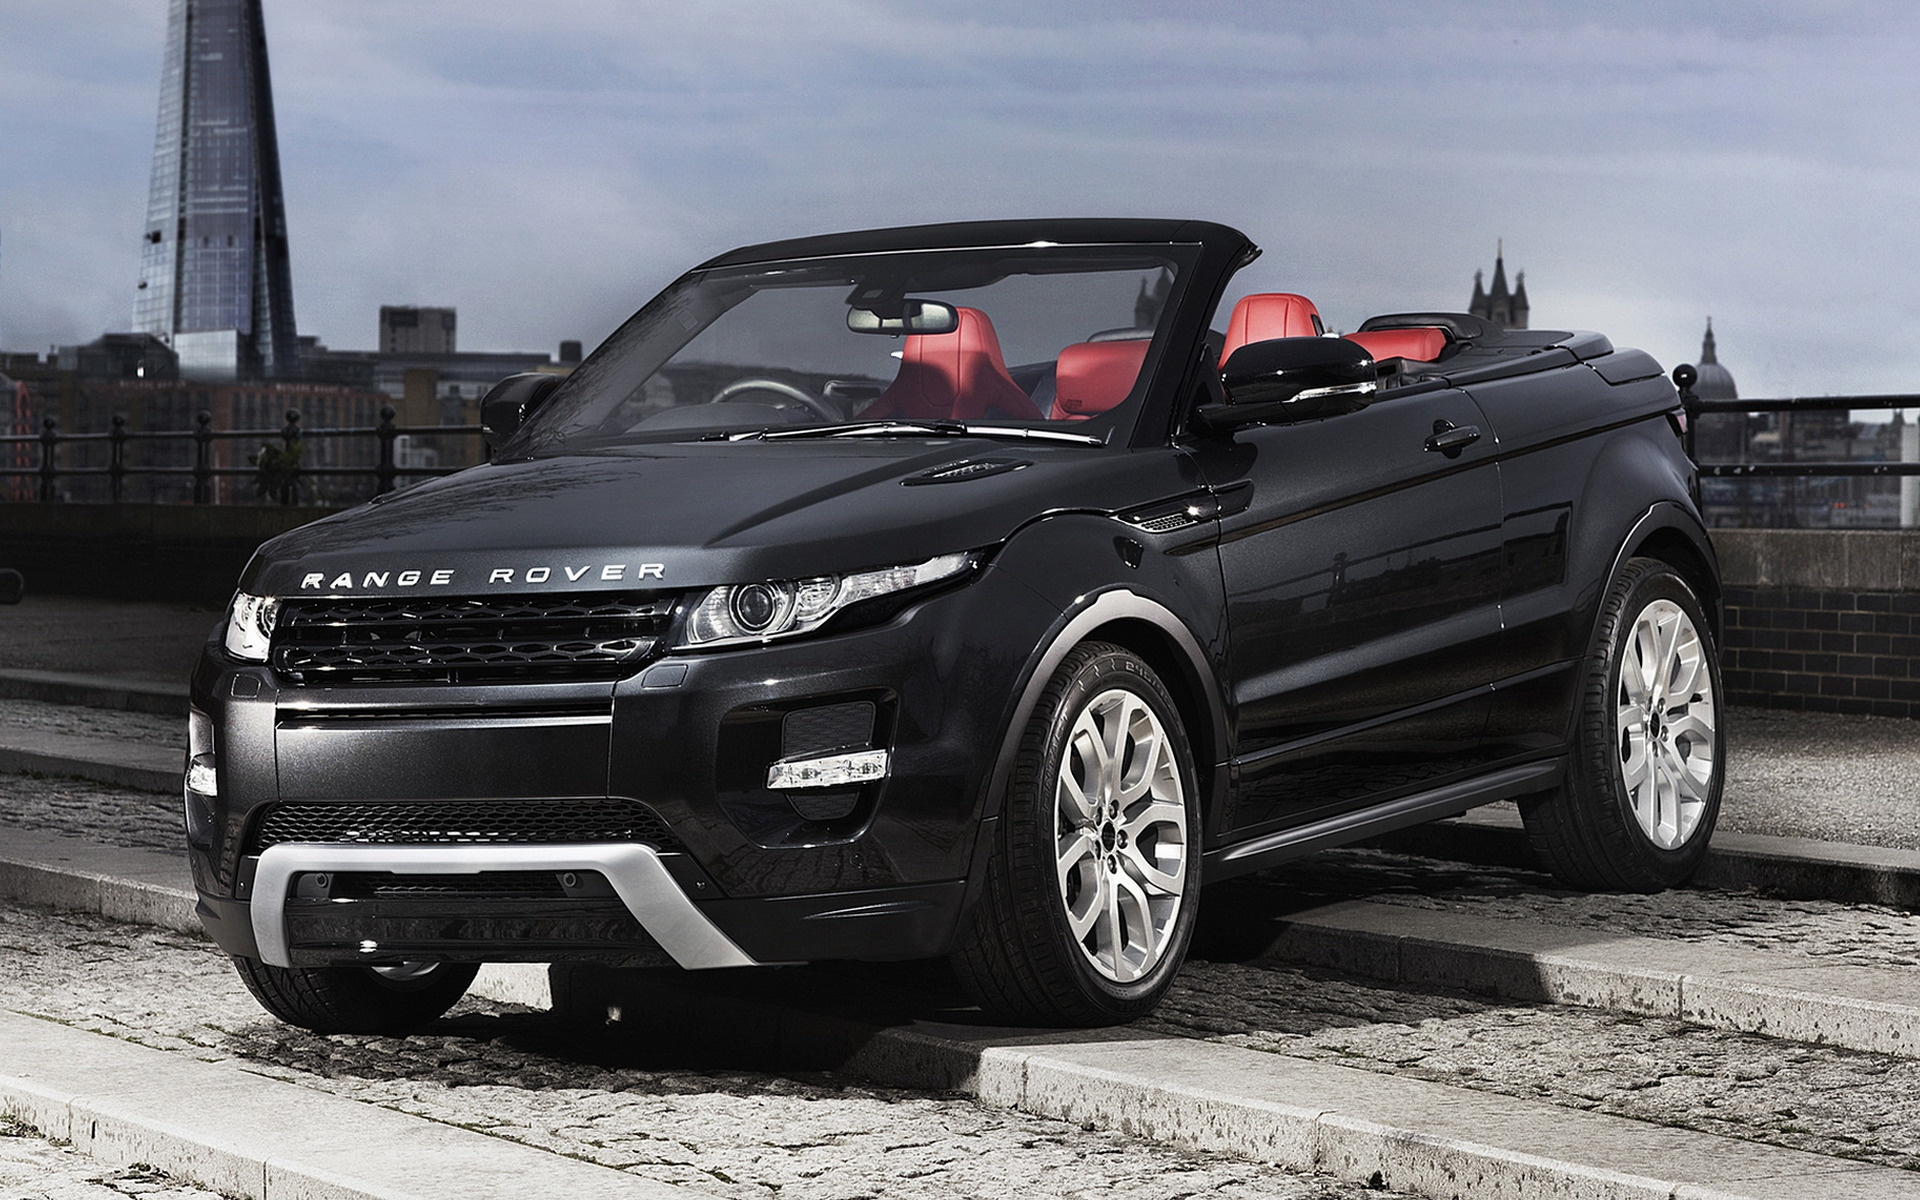 2012 Range Rover Evoque Convertible Concept - Wallpapers and HD Images